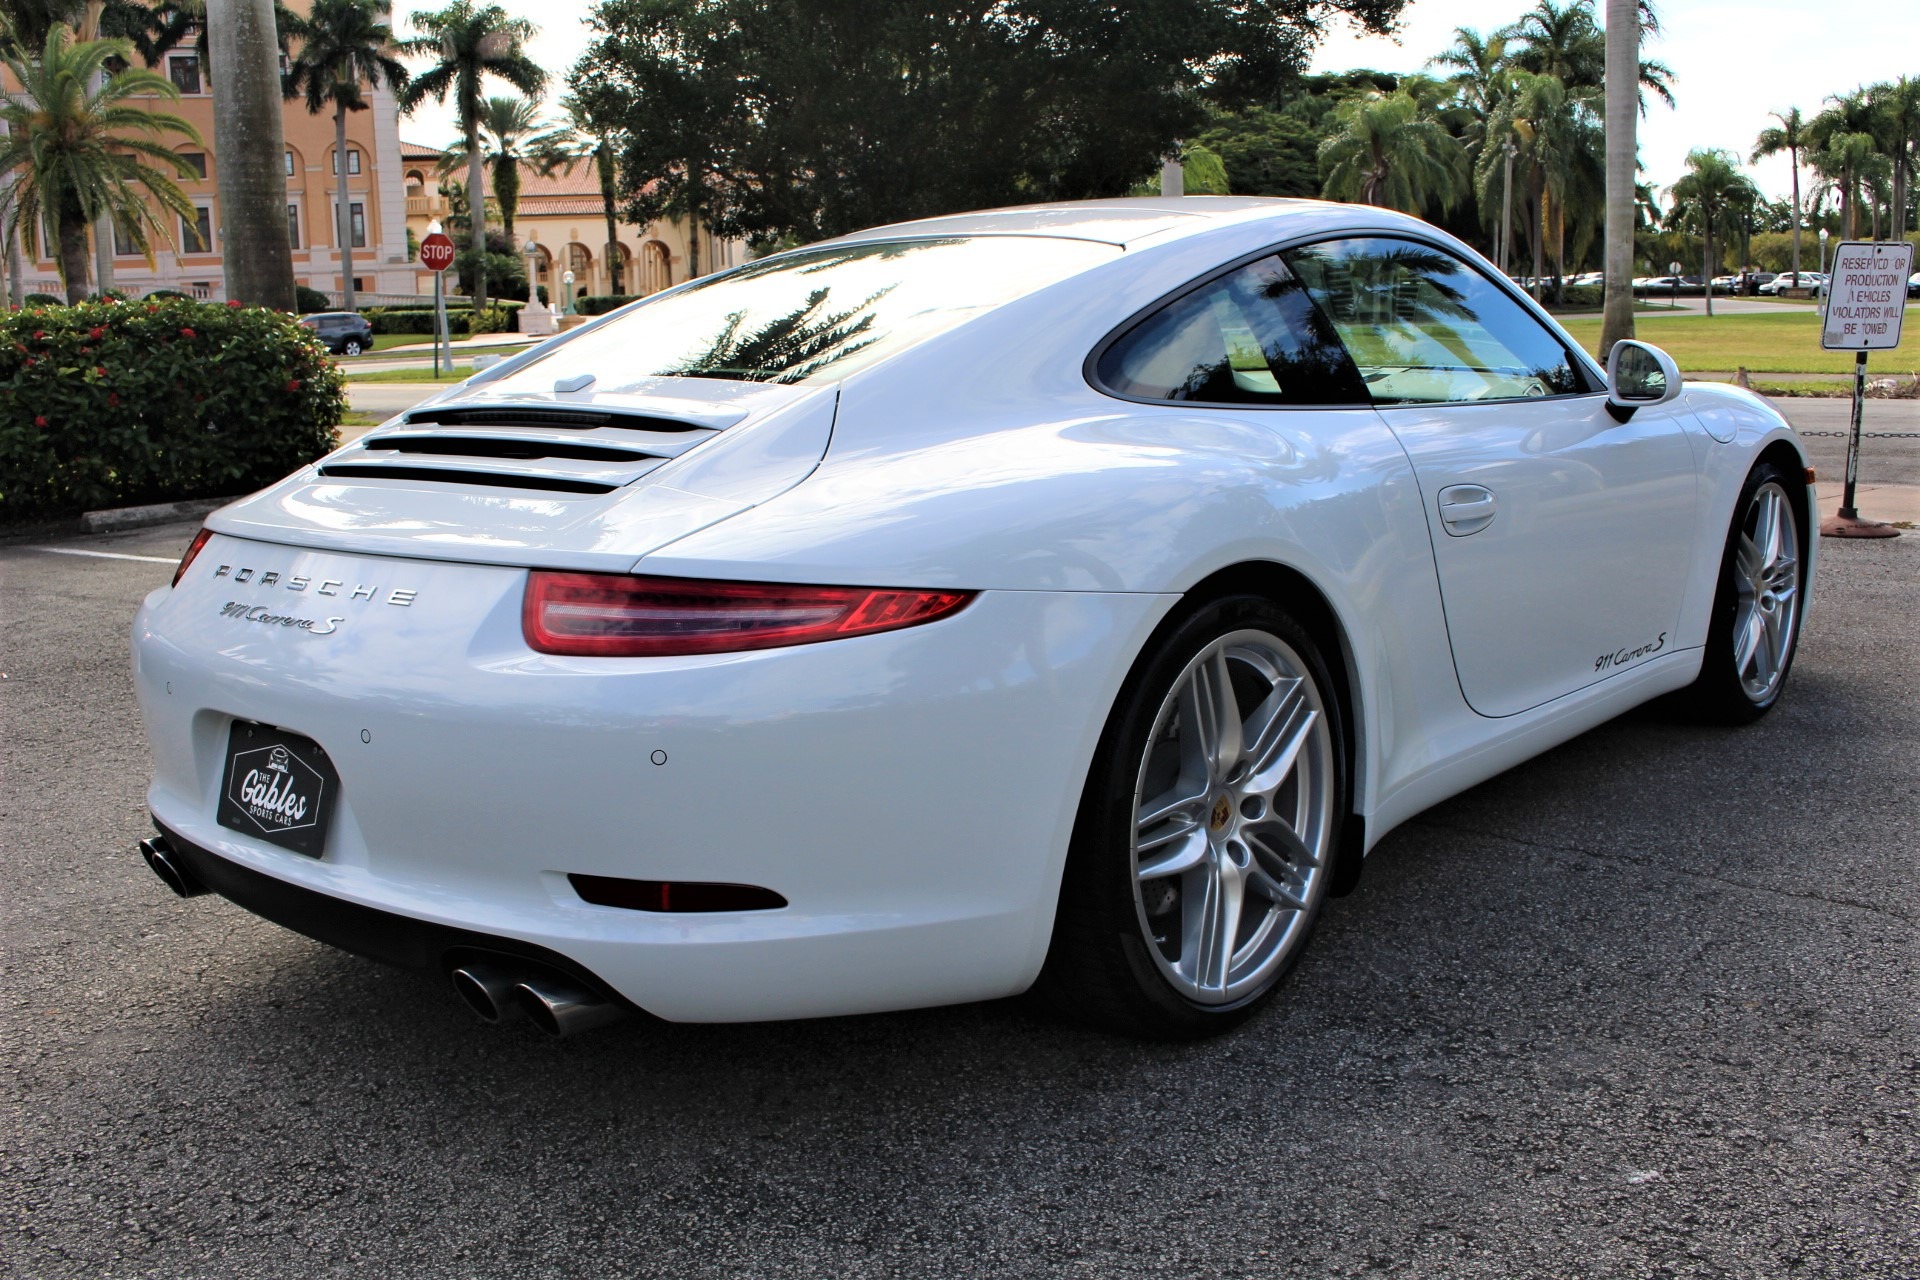 Used 2016 Porsche 911 Carrera S for sale Sold at The Gables Sports Cars in Miami FL 33146 3